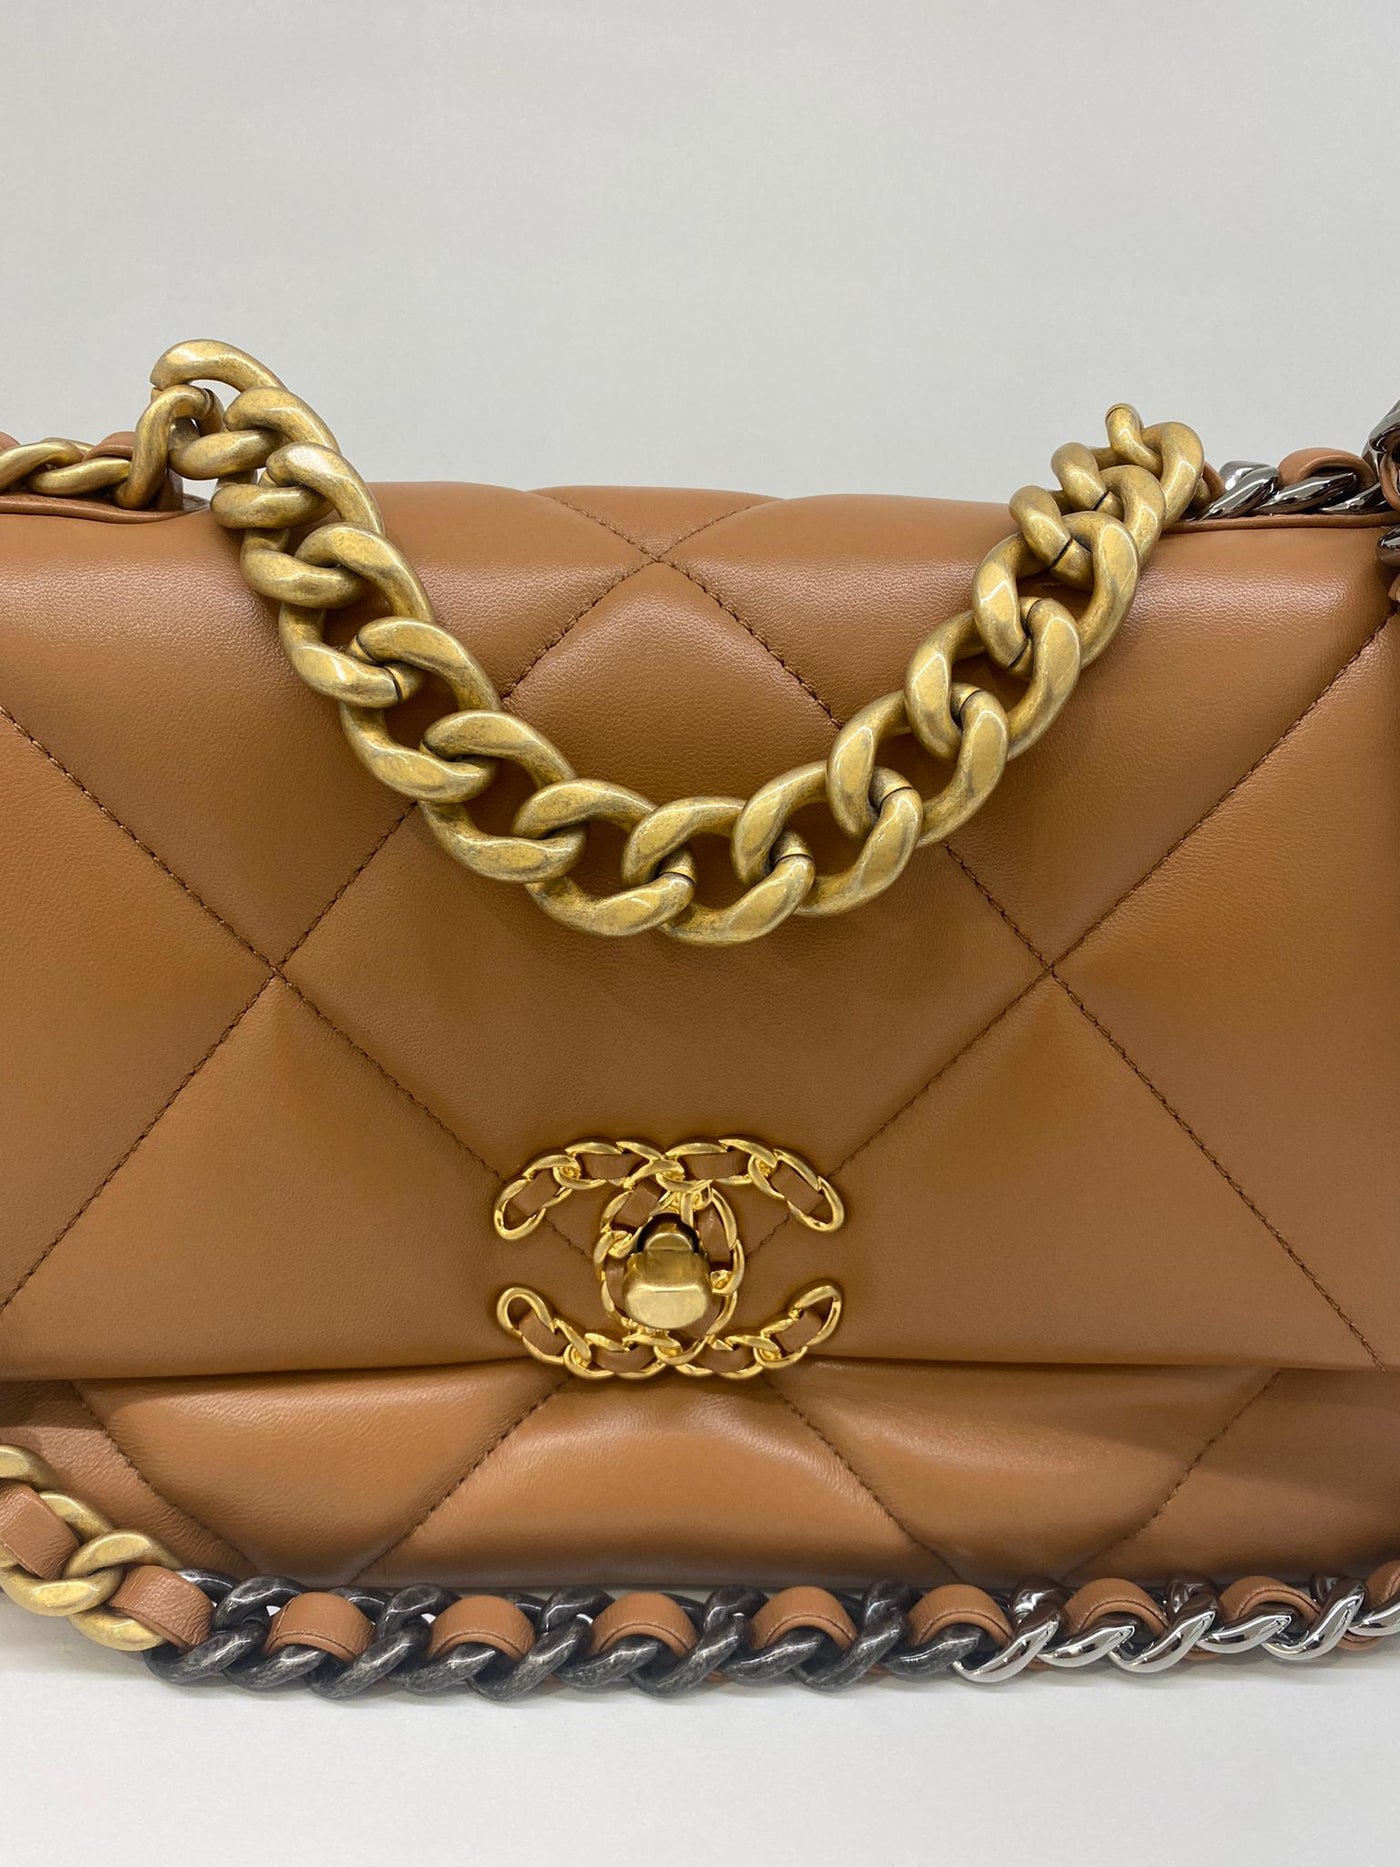 Chanel 19 Small Bag - Caramel - SOLD